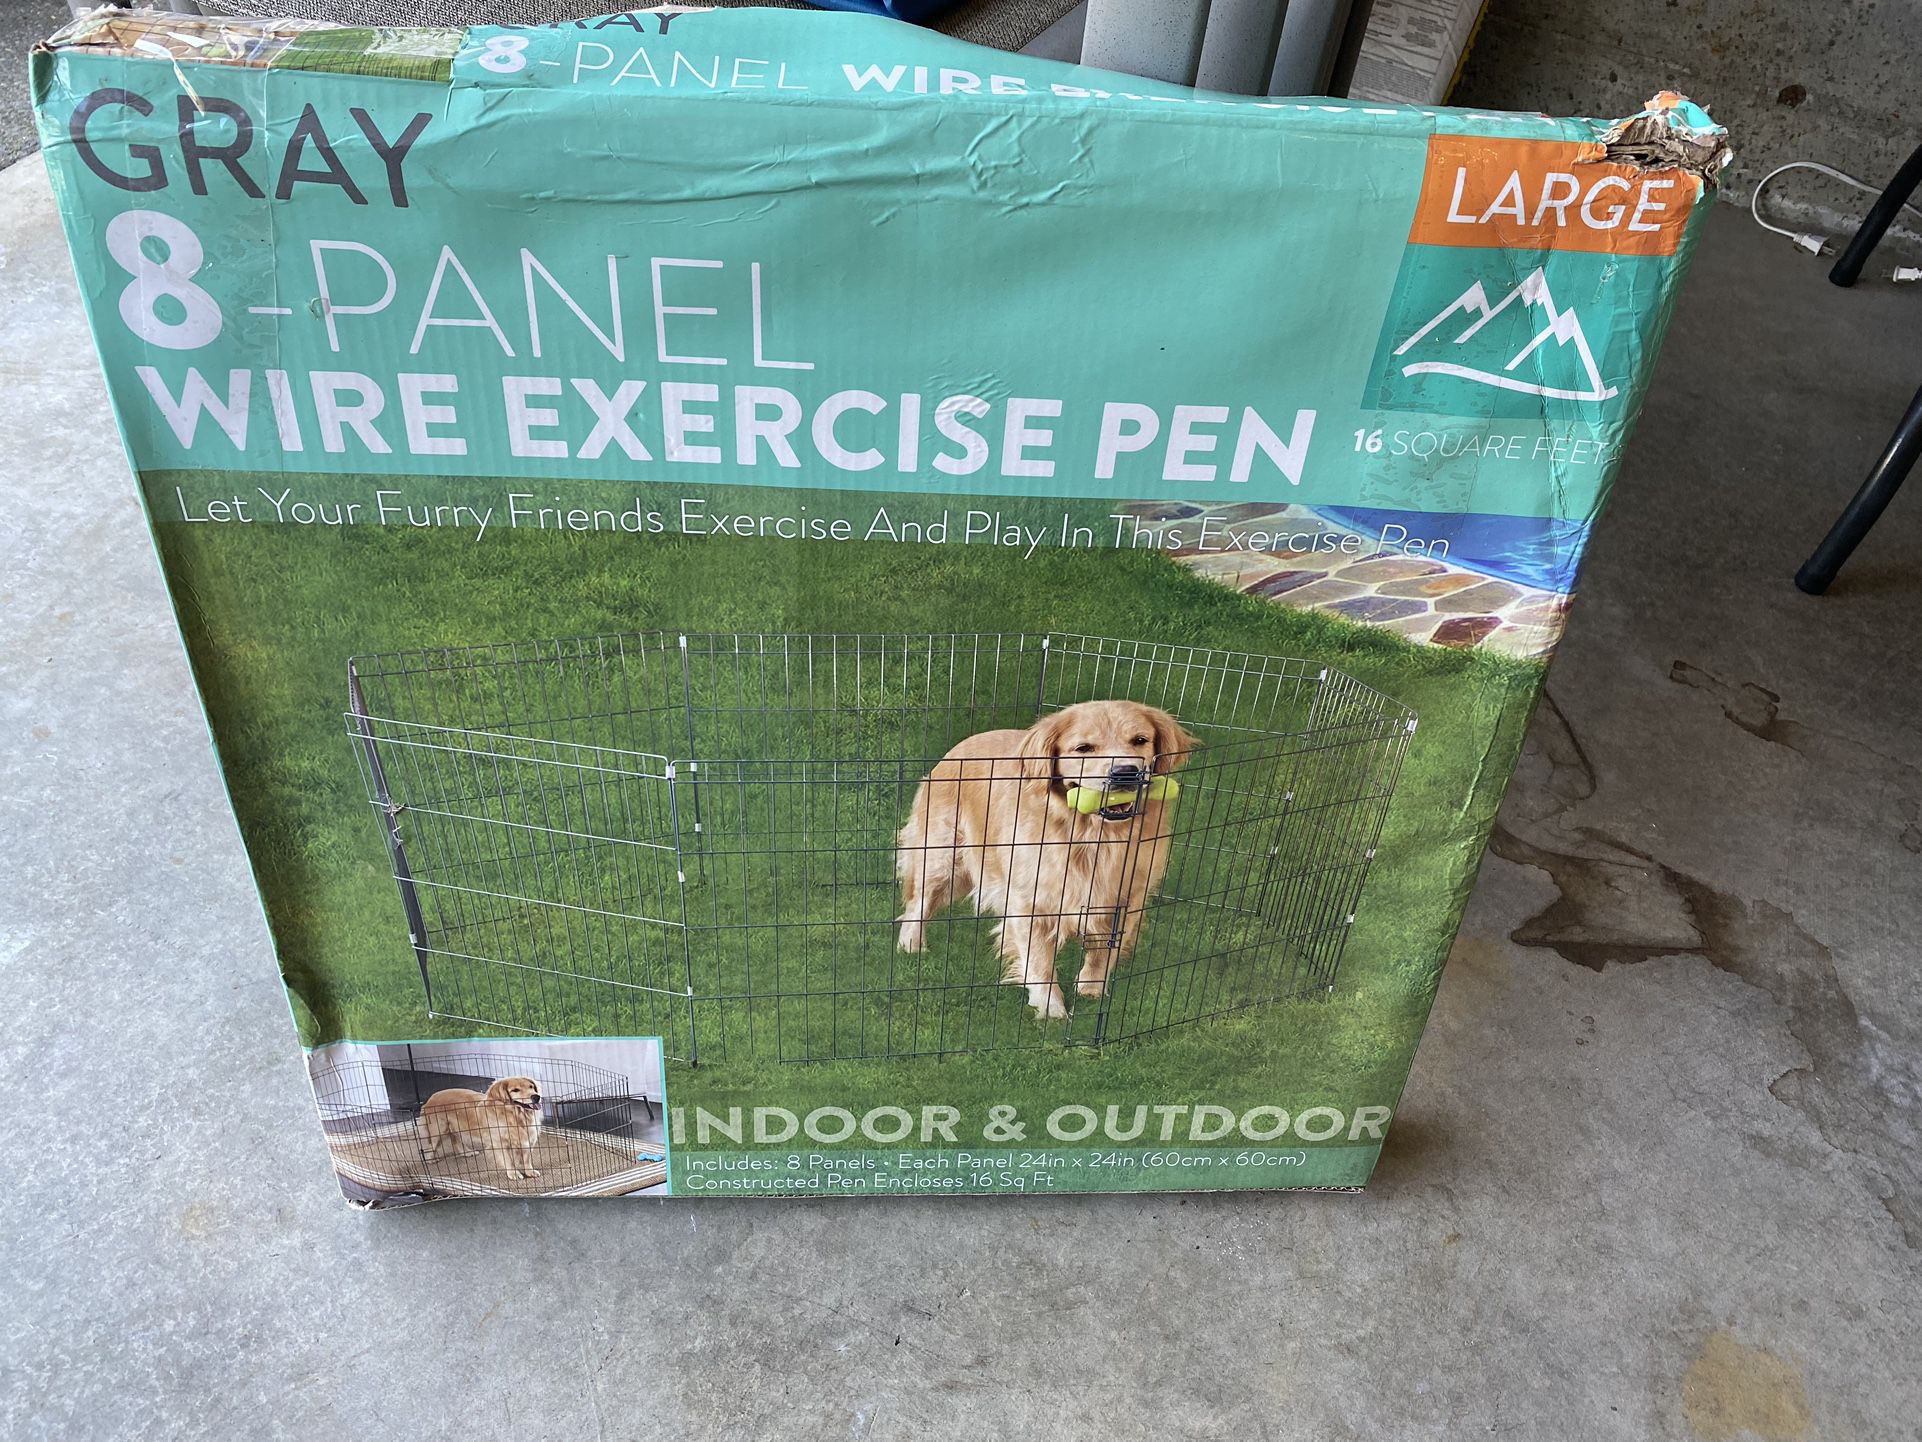 Free Wire Exercised Pen For Fur Friends 